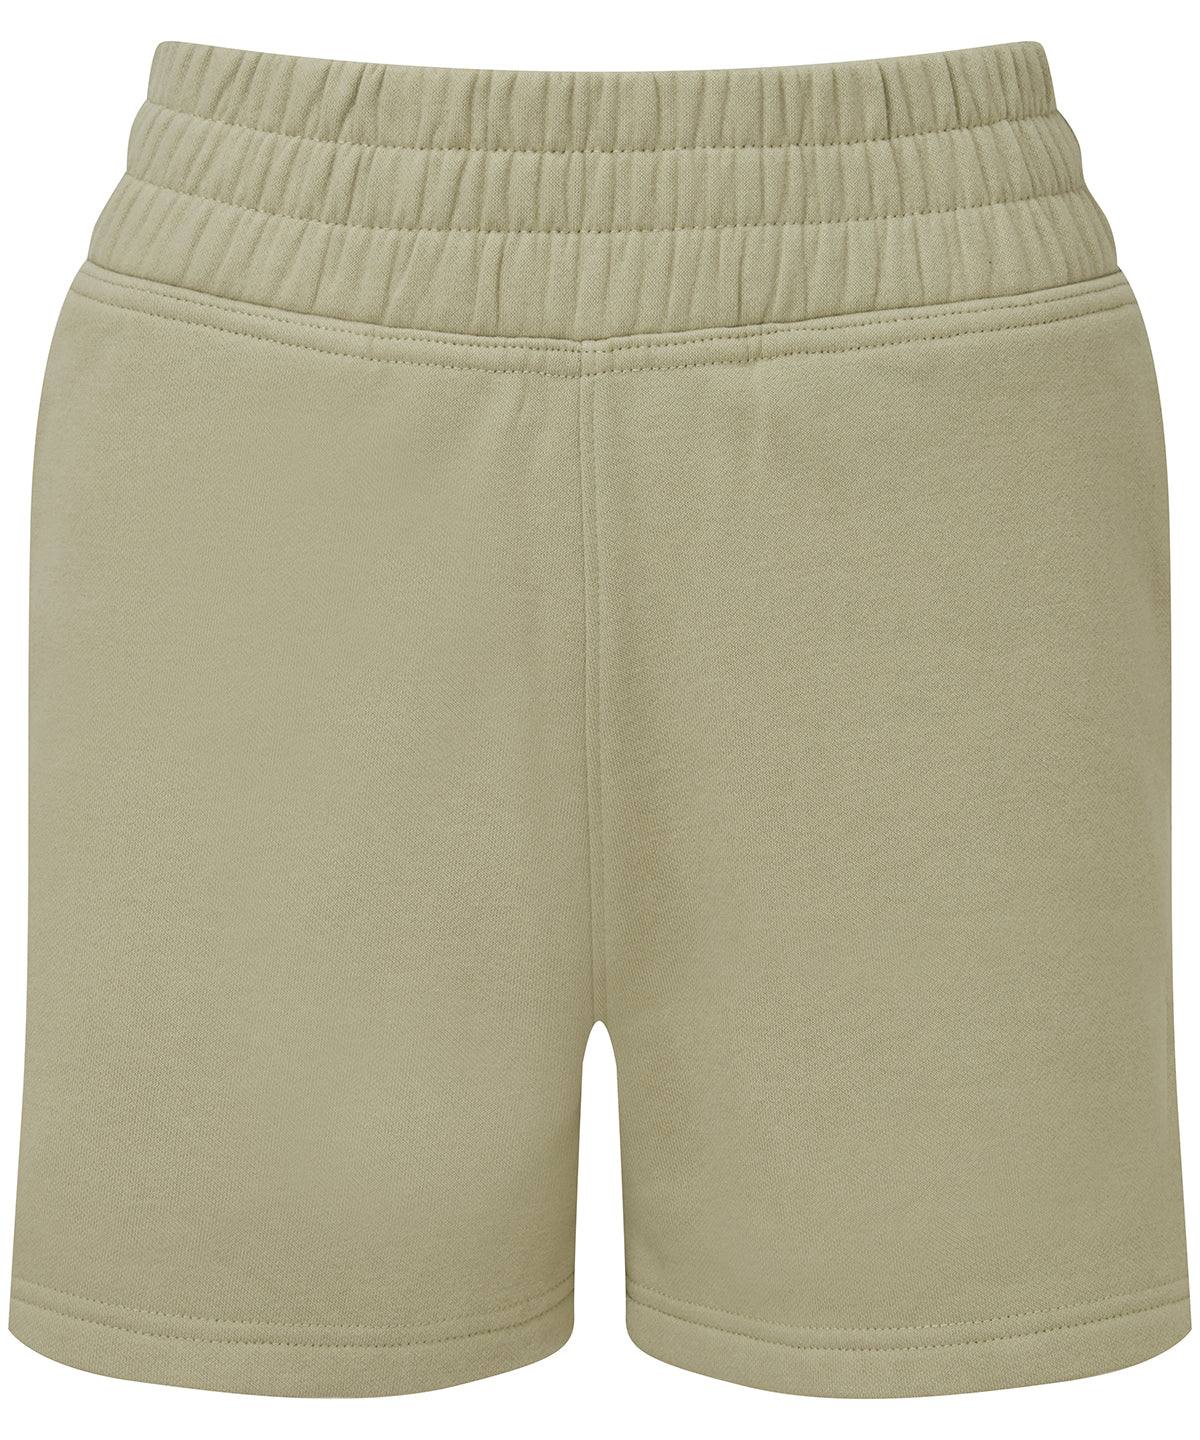 Sage Green - Women's TriDri® jogger shorts Shorts TriDri® Co-ords, Everyday Essentials, Exclusives, Must Haves, New For 2021, New In Autumn Winter, New In Mid Year, Street Casual, Streetwear, Tracksuits, Trousers & Shorts, Women's Fashion, Working From Home Schoolwear Centres